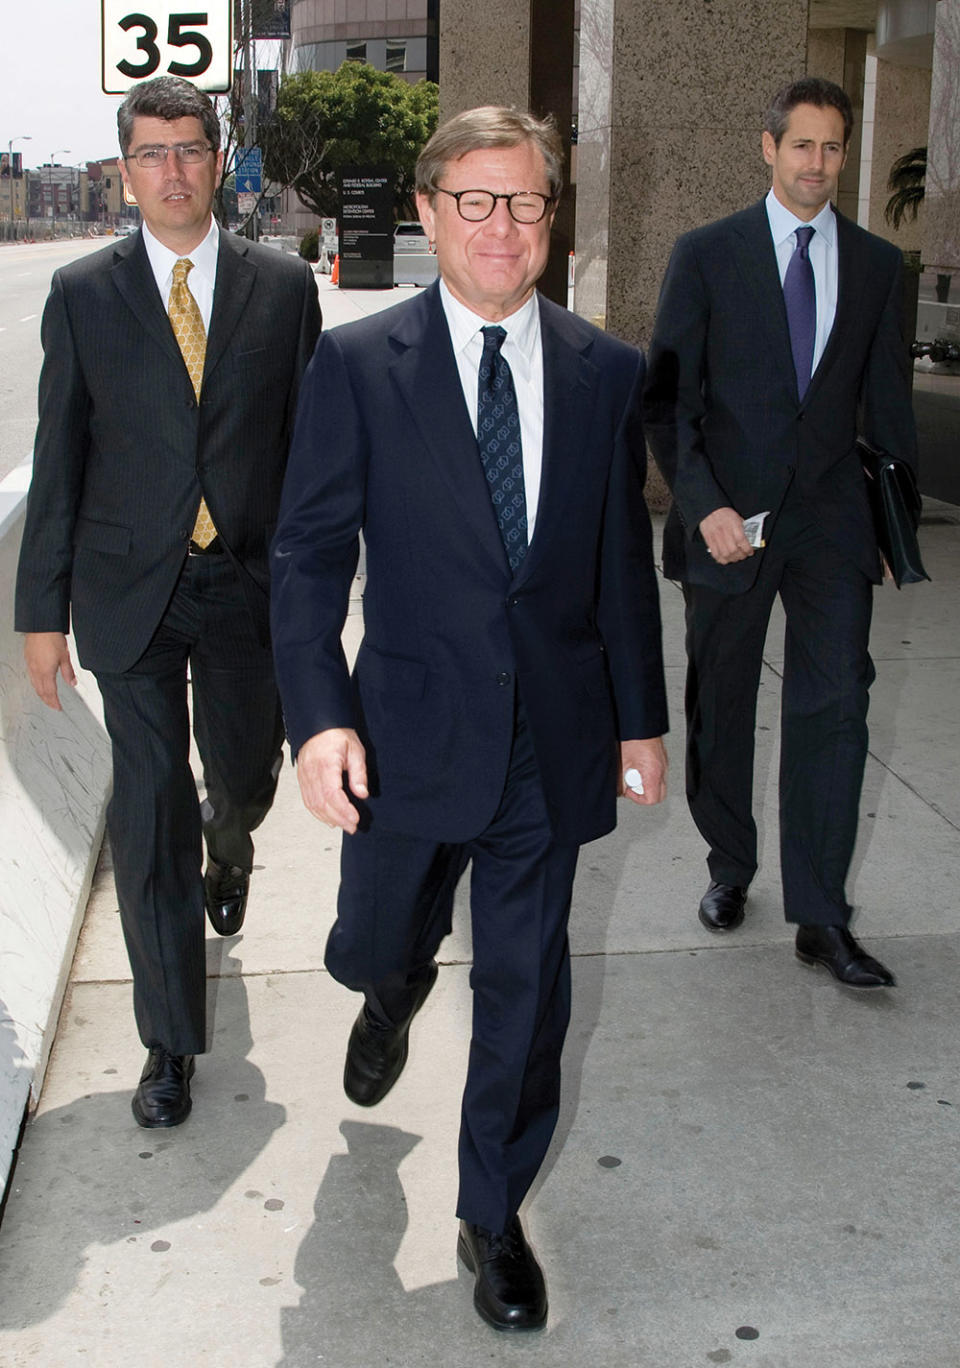 Michael Ovitz outside the 2008 wiretapping trial of private investigator Anthony Pellicano, who was sentenced to 15 years.